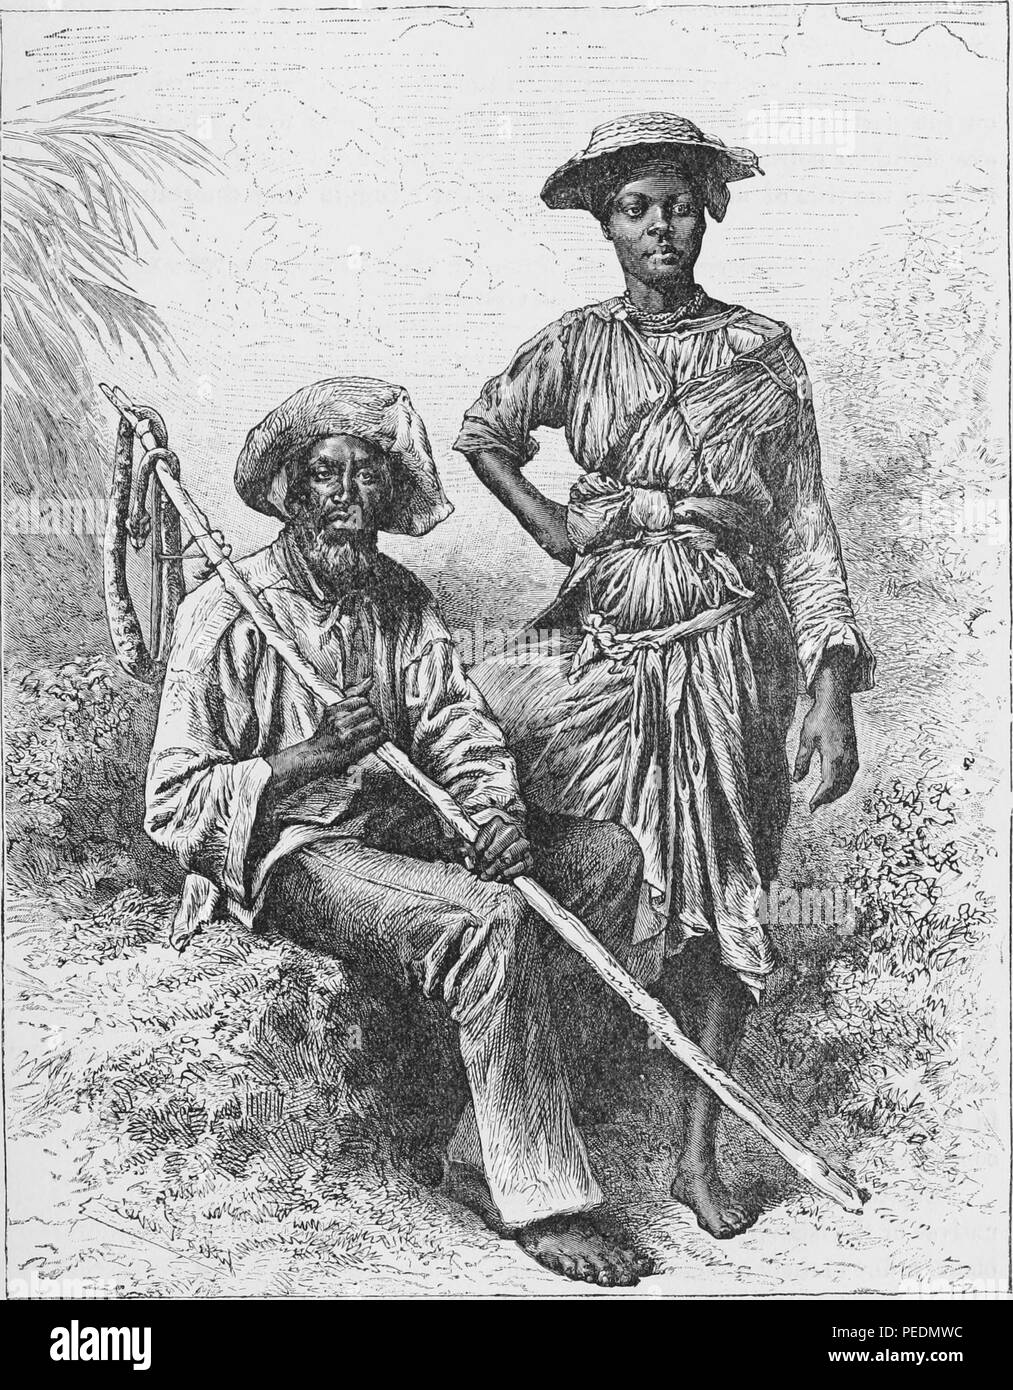 Black and white print depicting a 'Snake-Catcher and Charcoal Girl' in Martinique, West Indies, the seated man wears a hat and slings a long stick over his shoulder, the woman stands next to him, wearing a small brimmed hat and an intricately wrapped and knotted dress, both face the viewer with serious expressions on their faces, 1891. Courtesy Internet Archive. () Stock Photo